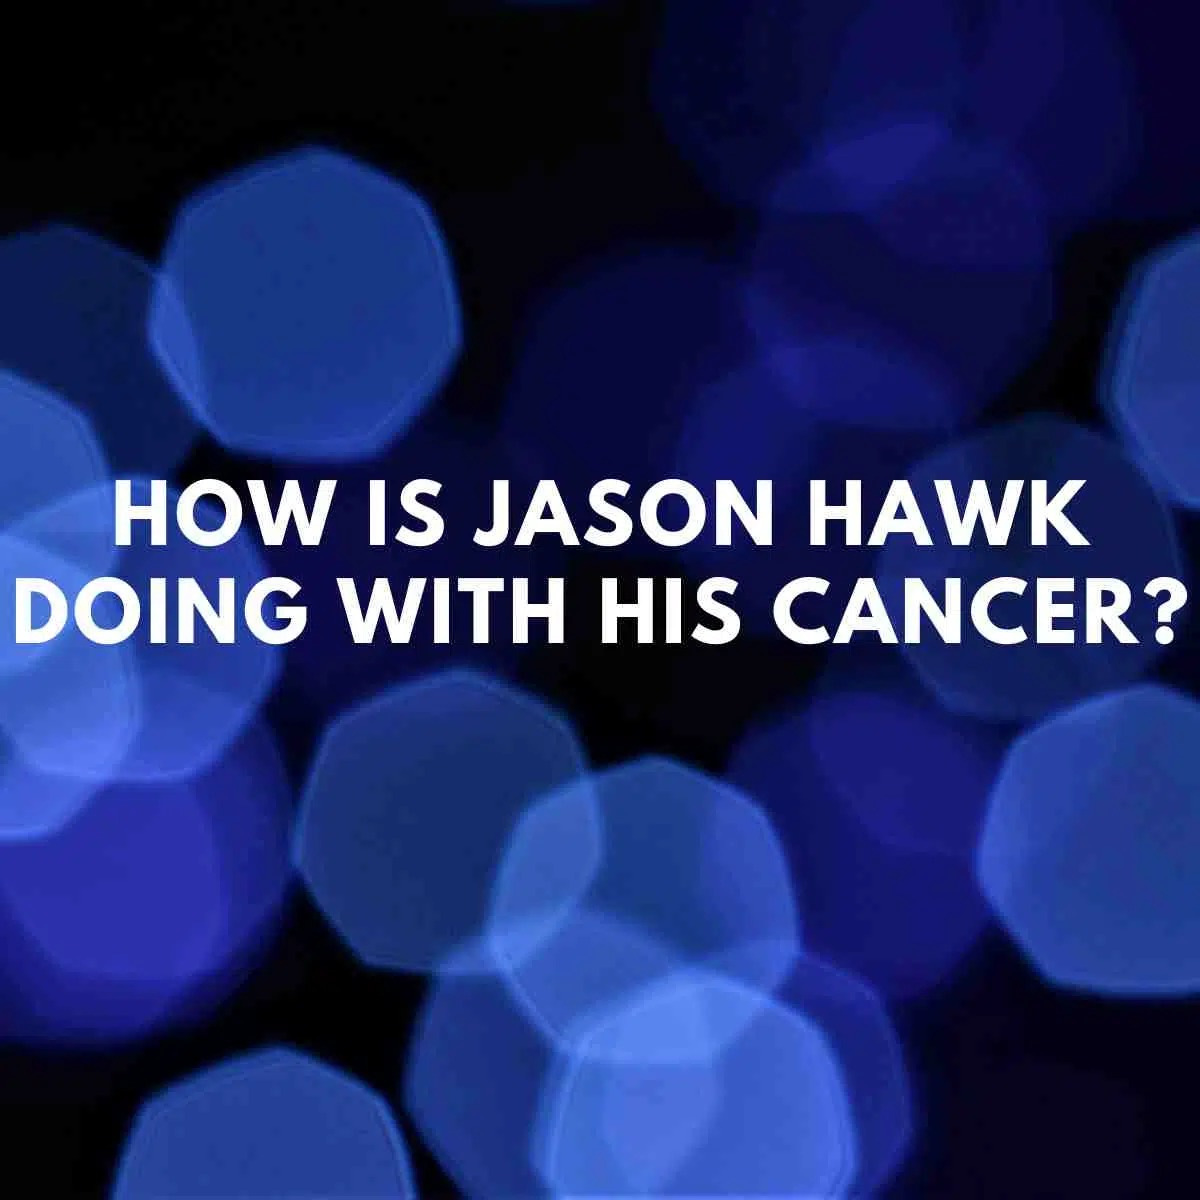 How is Jason Hawk doing with his cancer